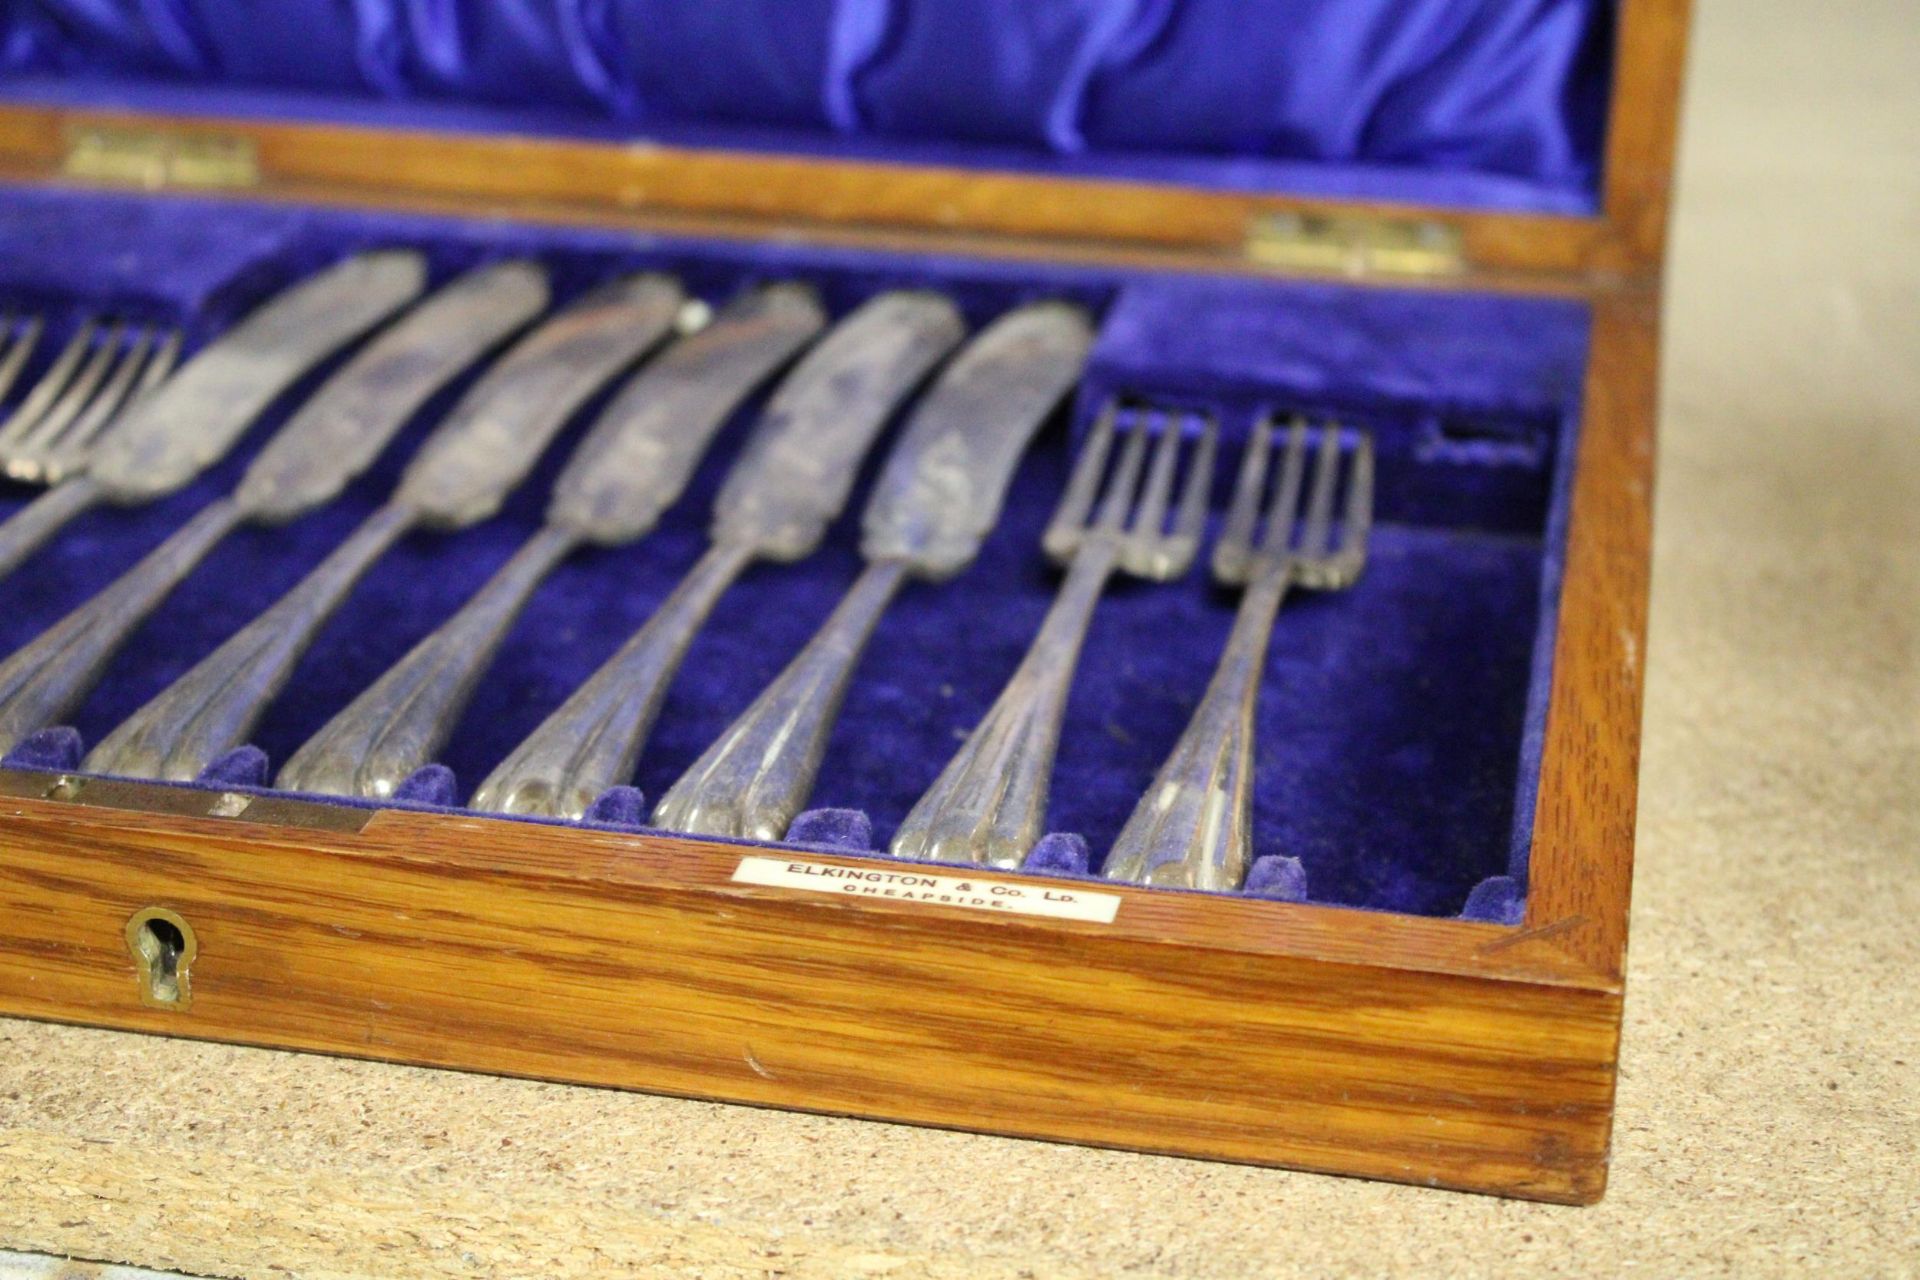 A VINTAGE ELKINGTON & CO FISH KNIFE AND FORK SET IN A LINED MAHOGANY BOX, WITH MAKER'S MARK - 1 FORK - Image 5 of 5